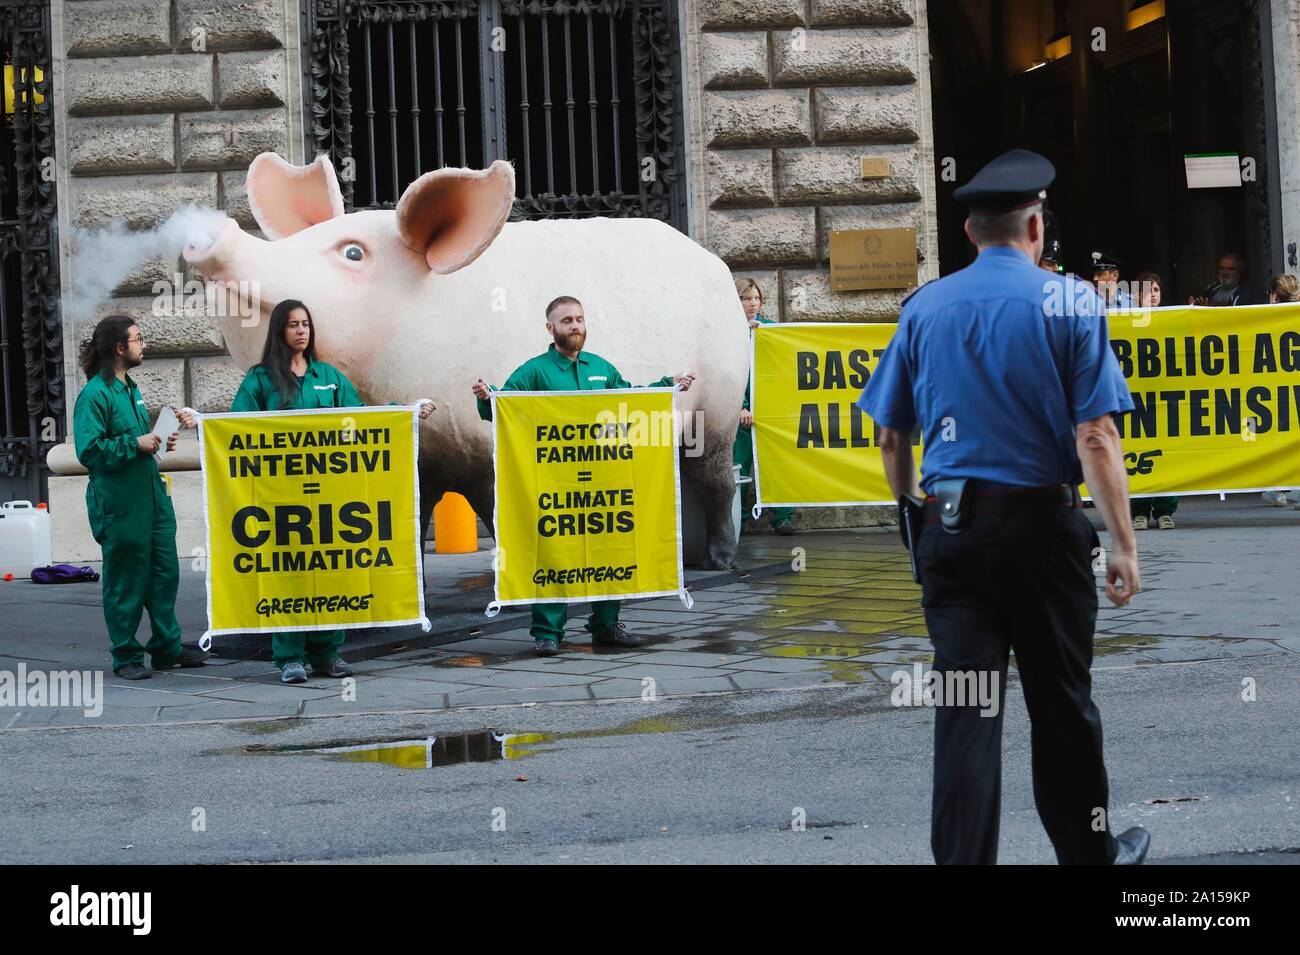 Italy, Rome, September 24, 2019 : Greenpeace activists protest in front of the Ministry of Agriculture, to demand the suspension of funding for intens Stock Photo